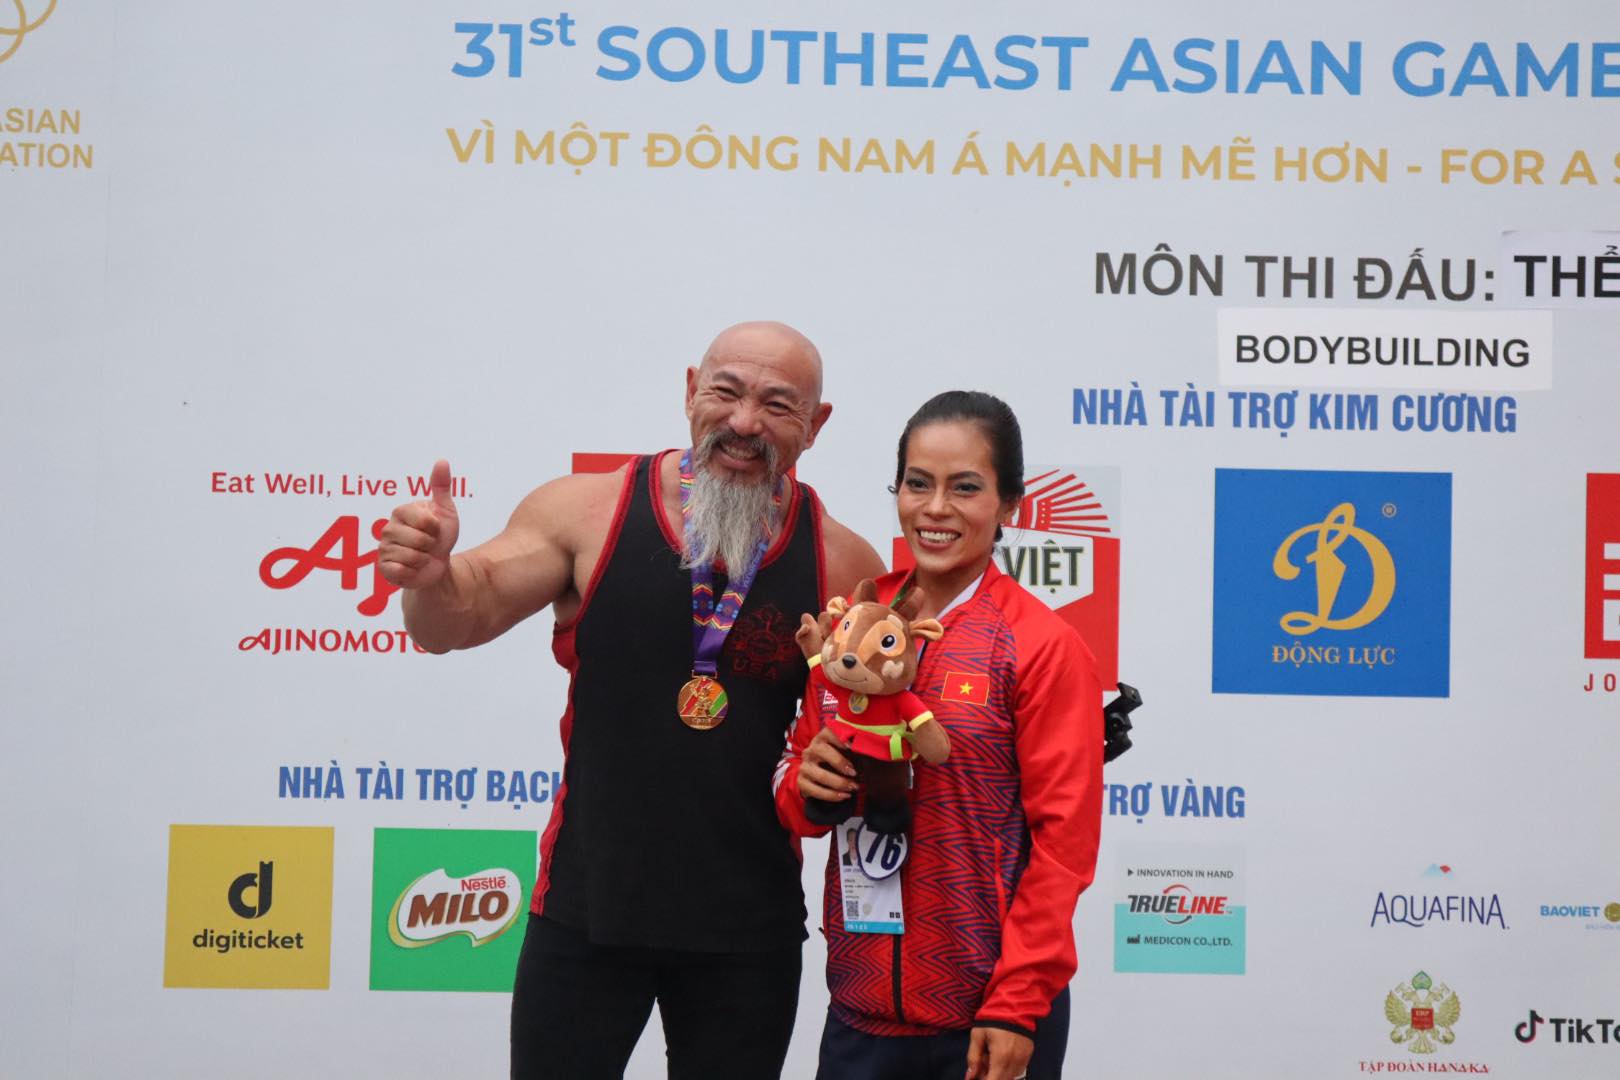 Athlete Dinh Kim Loan: A poor country girl who overcomes prejudice in pursuit of bodybuilding, won the world championship twice, but took 16 years to get the first SEA Games gold medal - Photo 4.